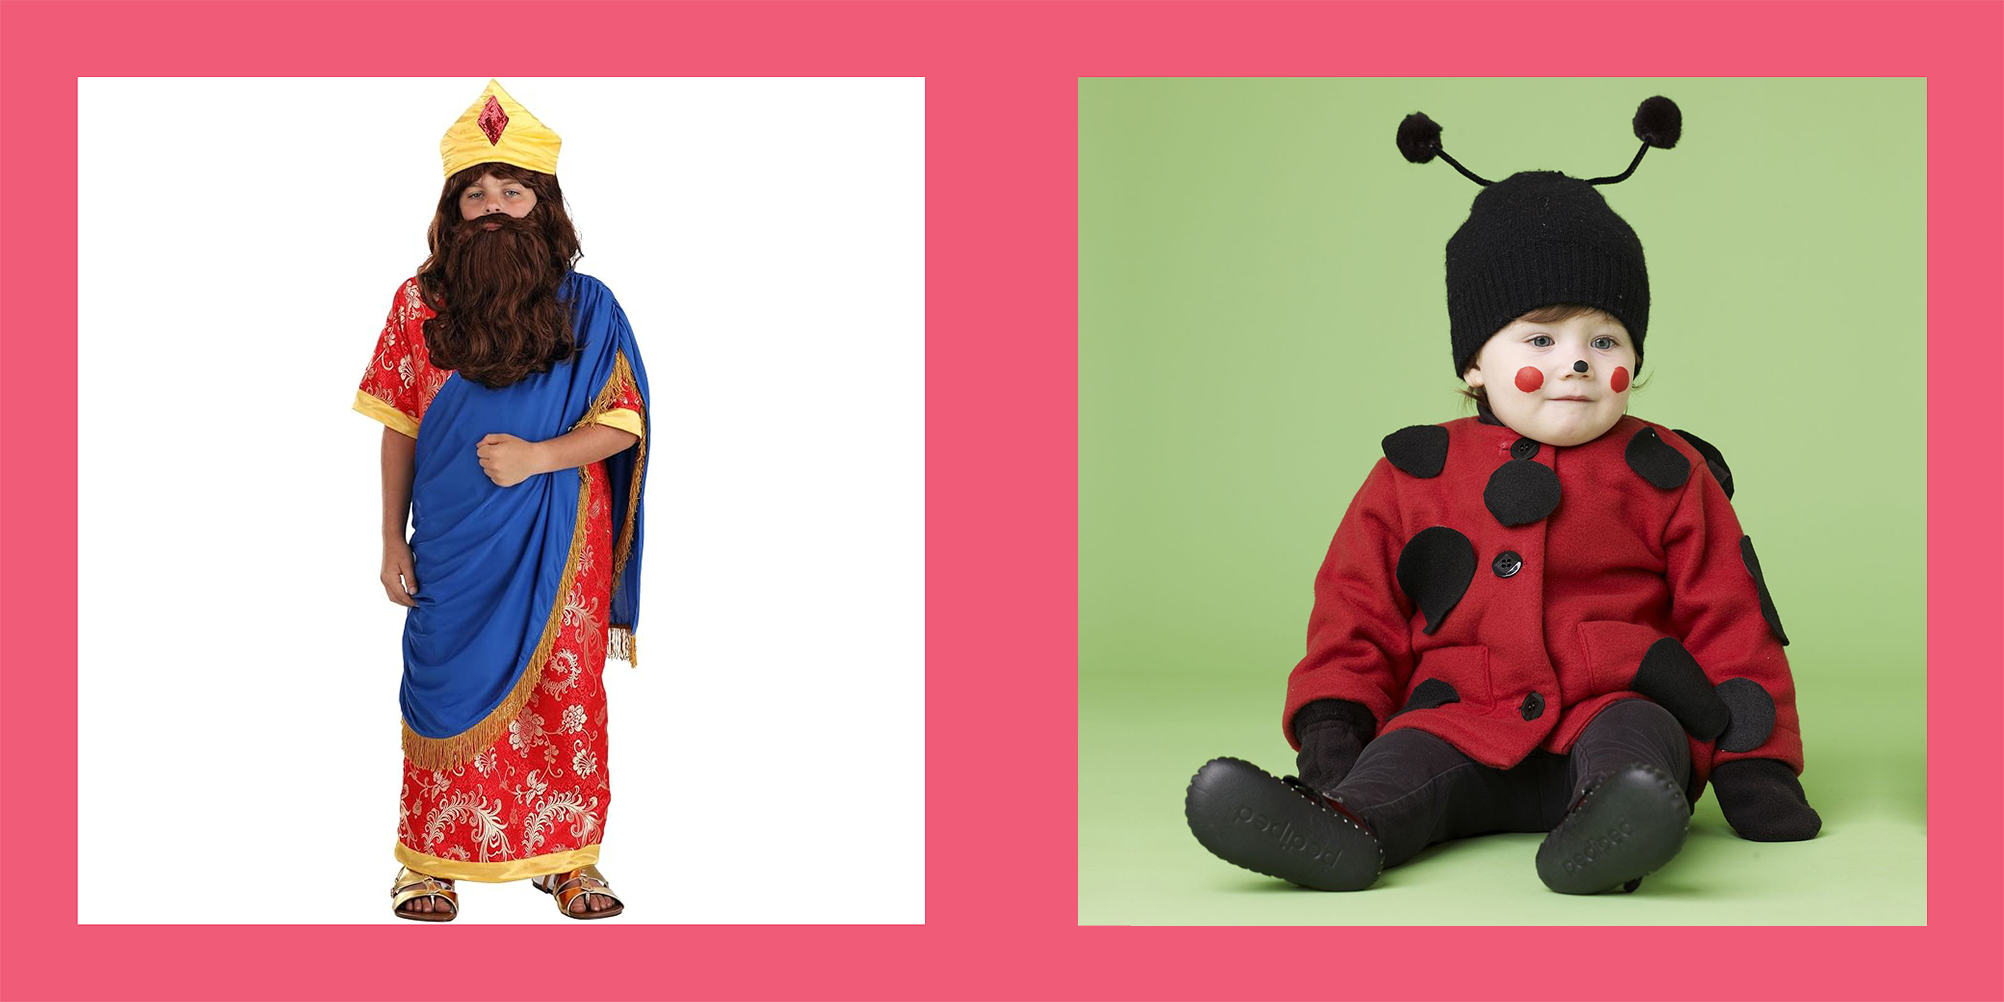 Purim Costumes for Kids That You Can Buy or DIY